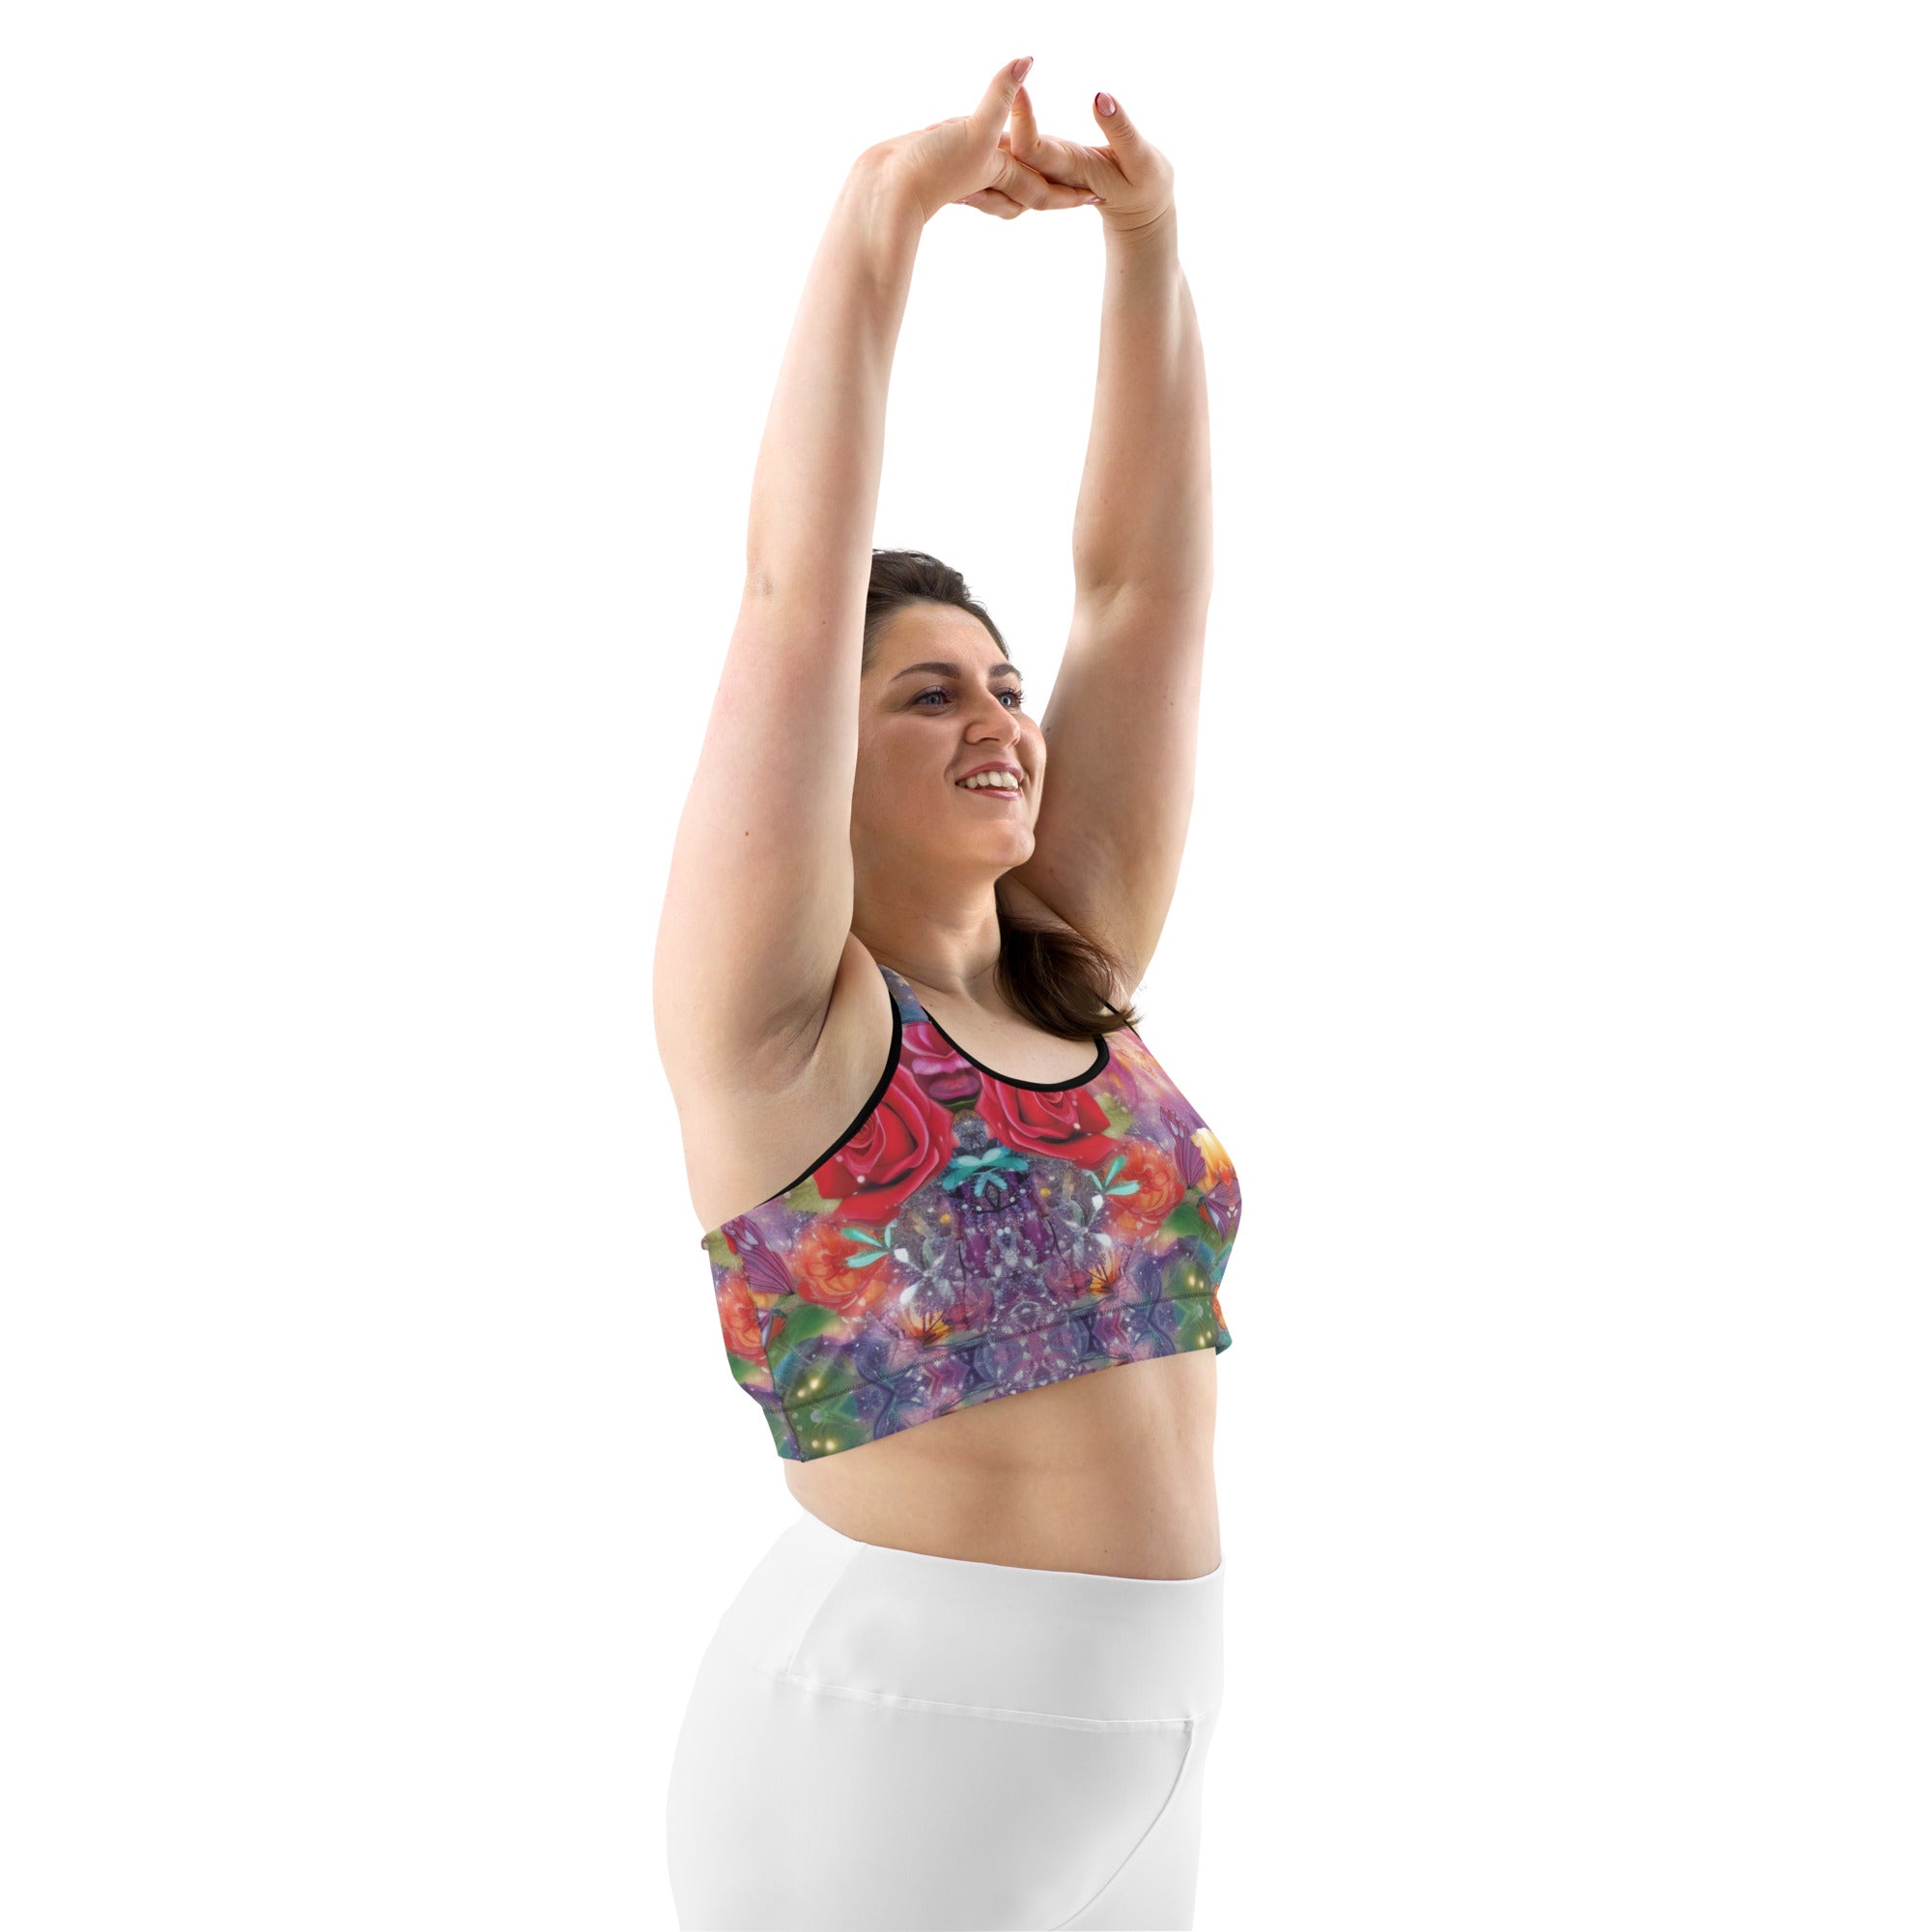 Embrace the Magic of Fitness with Our Fairy-inspired Sports Bra